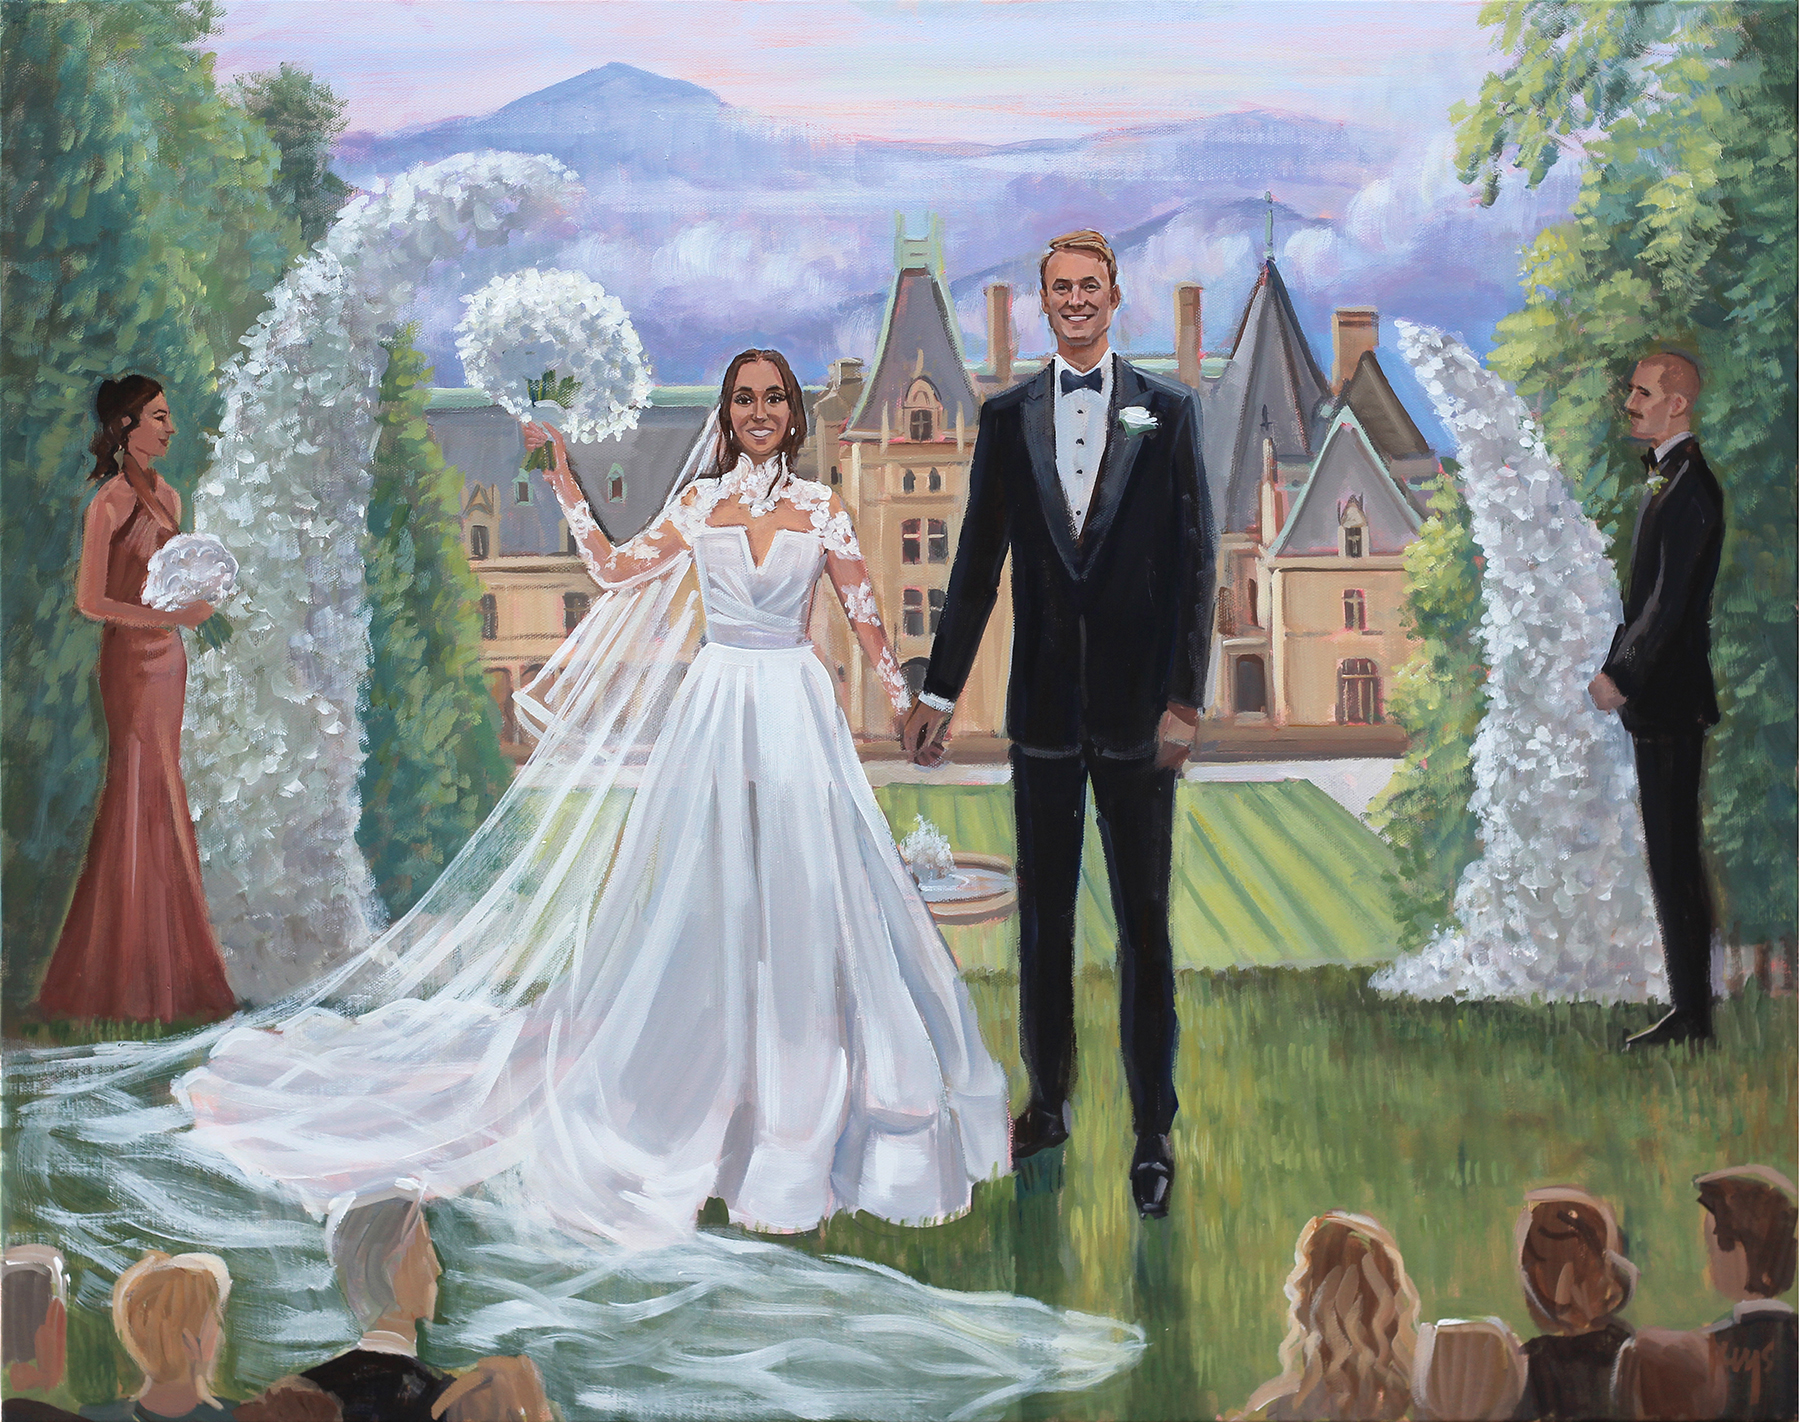 Haley and Rich's live wedding painting at Diana at Biltmore Wedding ceremony, Asheville, NC